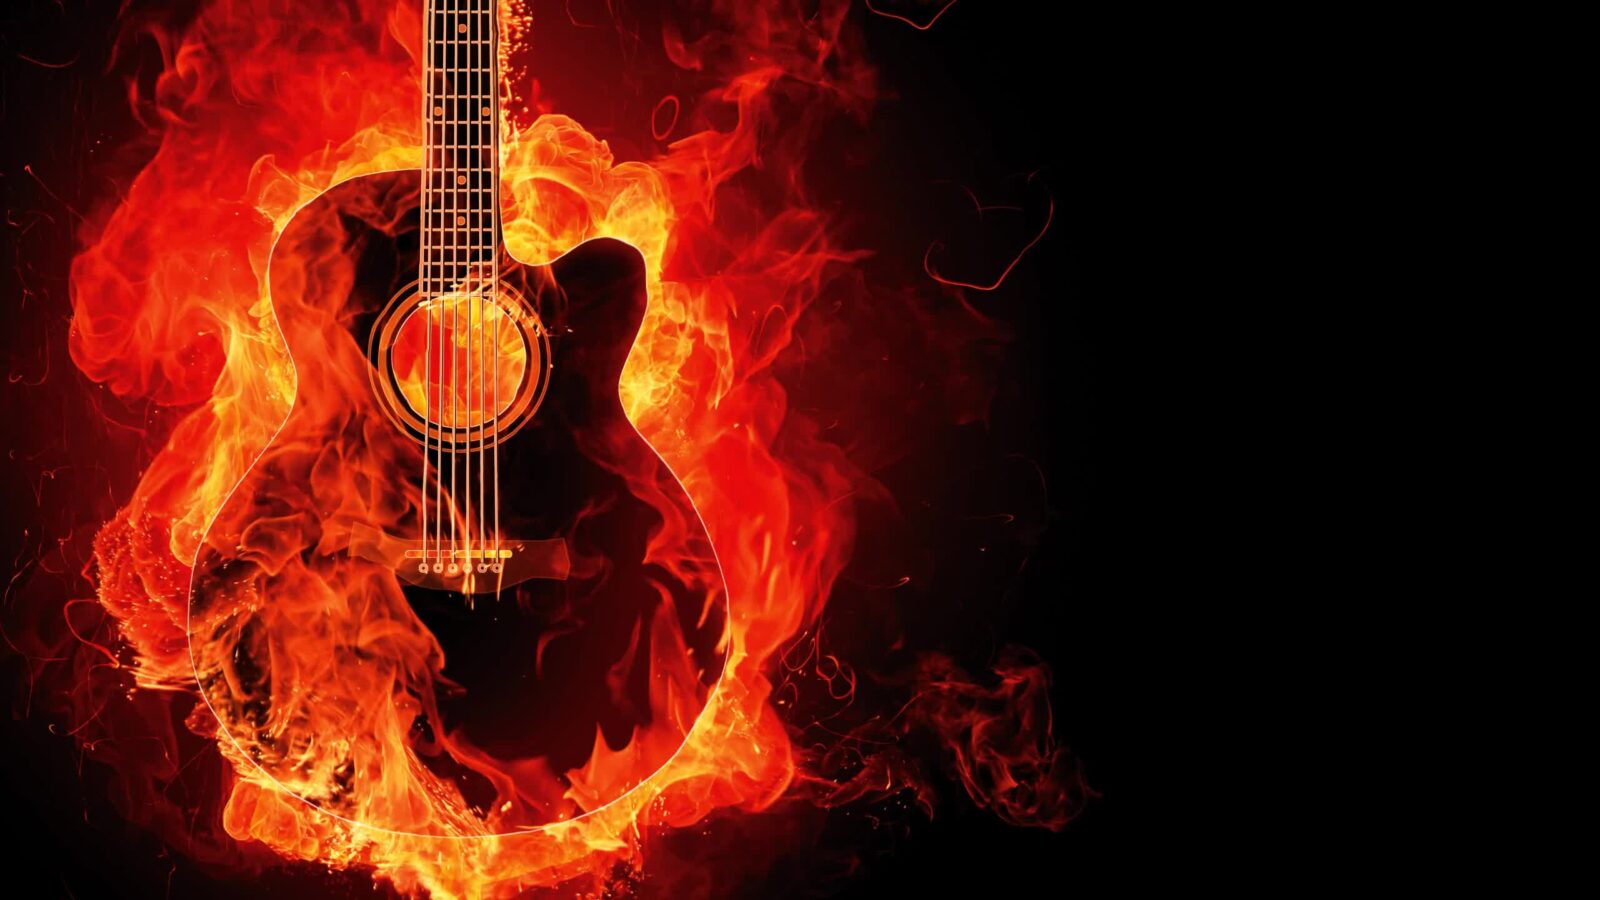 Guitar Flame Fantasy Abstract 2K Quality - Free Live Wallpaper - Live